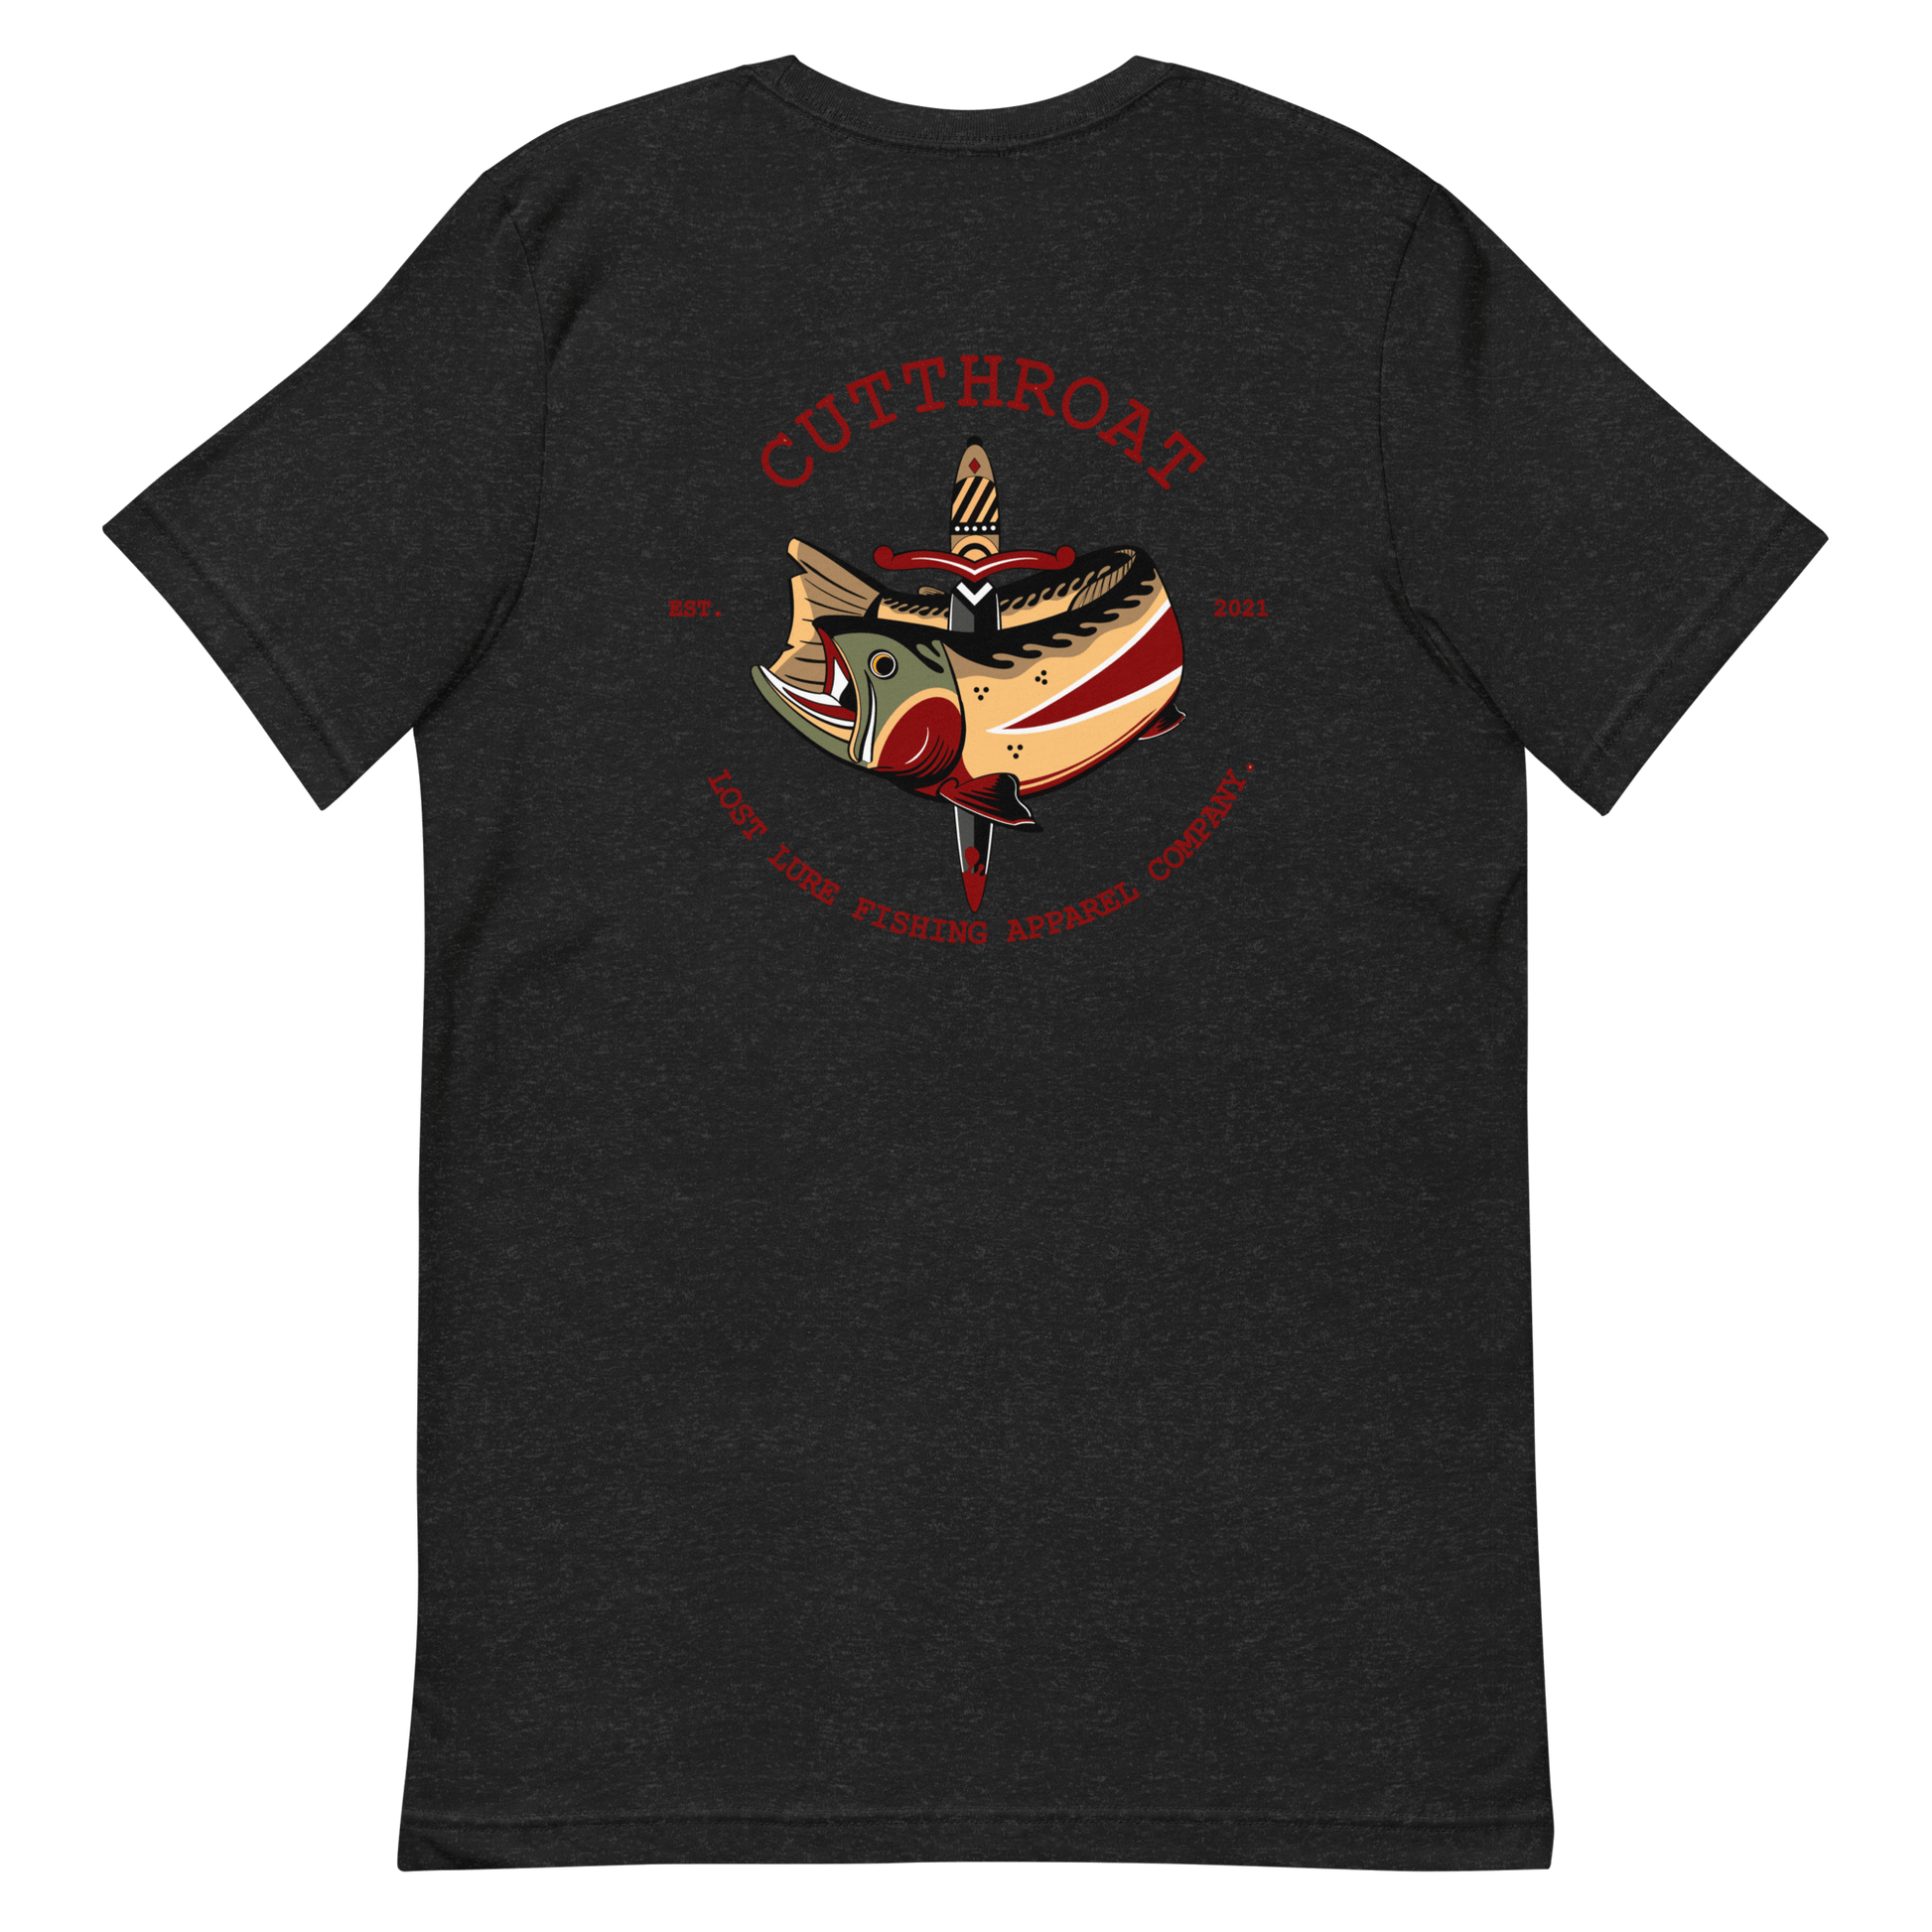 Cutthroat Trout fishing shirt. It’s an American traditional style design with a cutthroat trout and a dagger. The shirt reads Cutthroat trout, est. 2021, lost lure fishing apparel company. The front of the shirt has the lost lure logo. Dark Gray shirt, back side